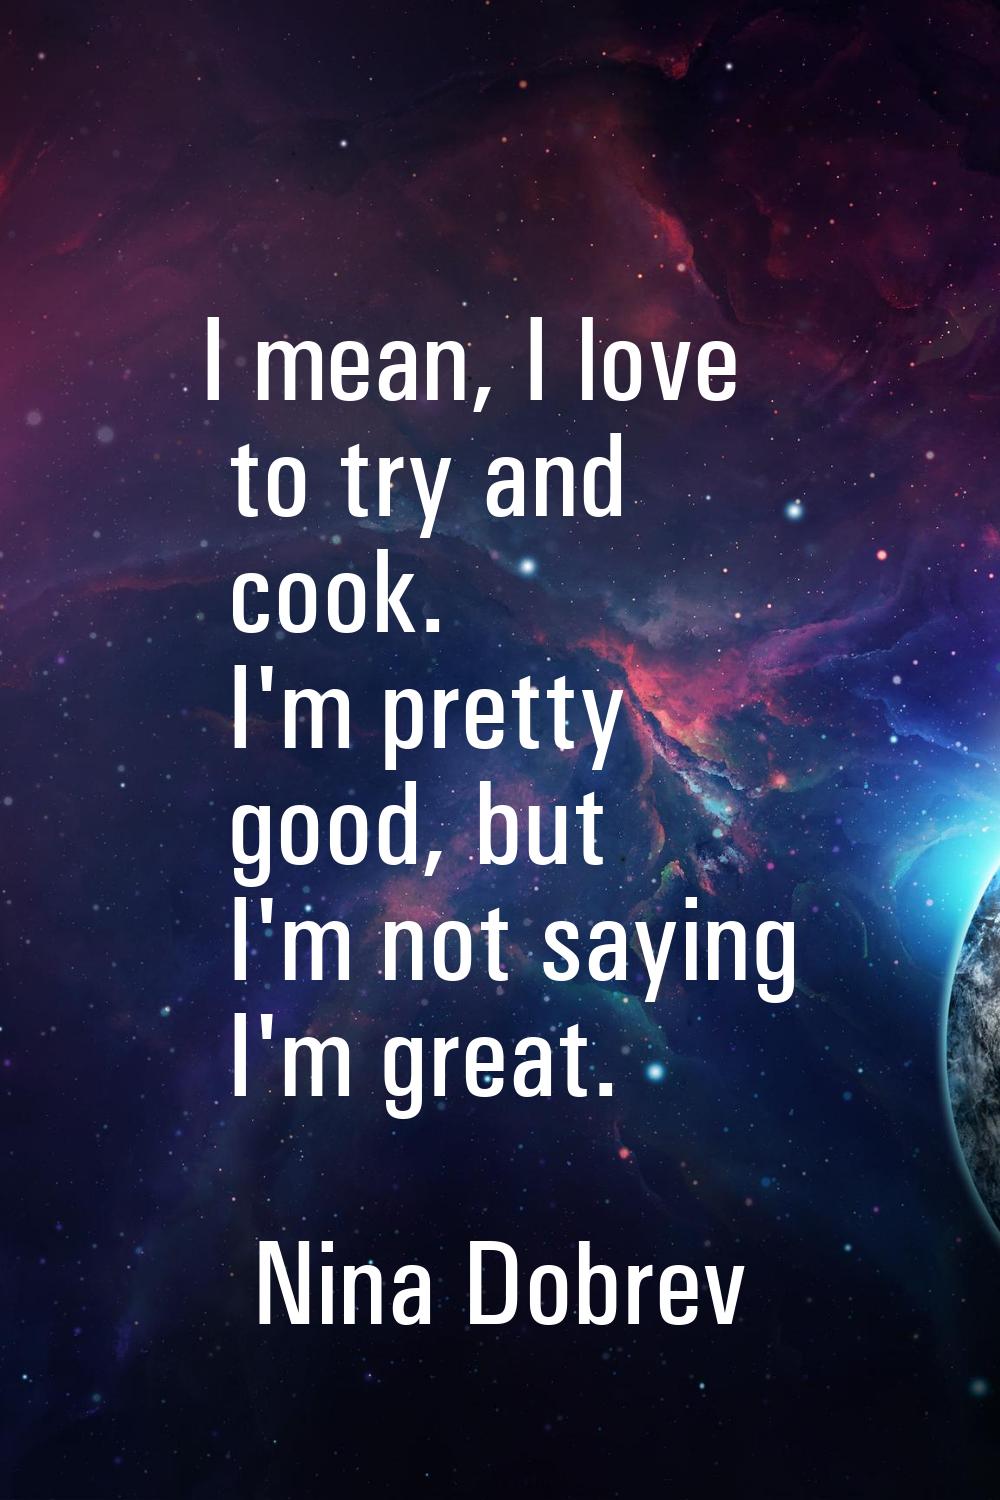 I mean, I love to try and cook. I'm pretty good, but I'm not saying I'm great.